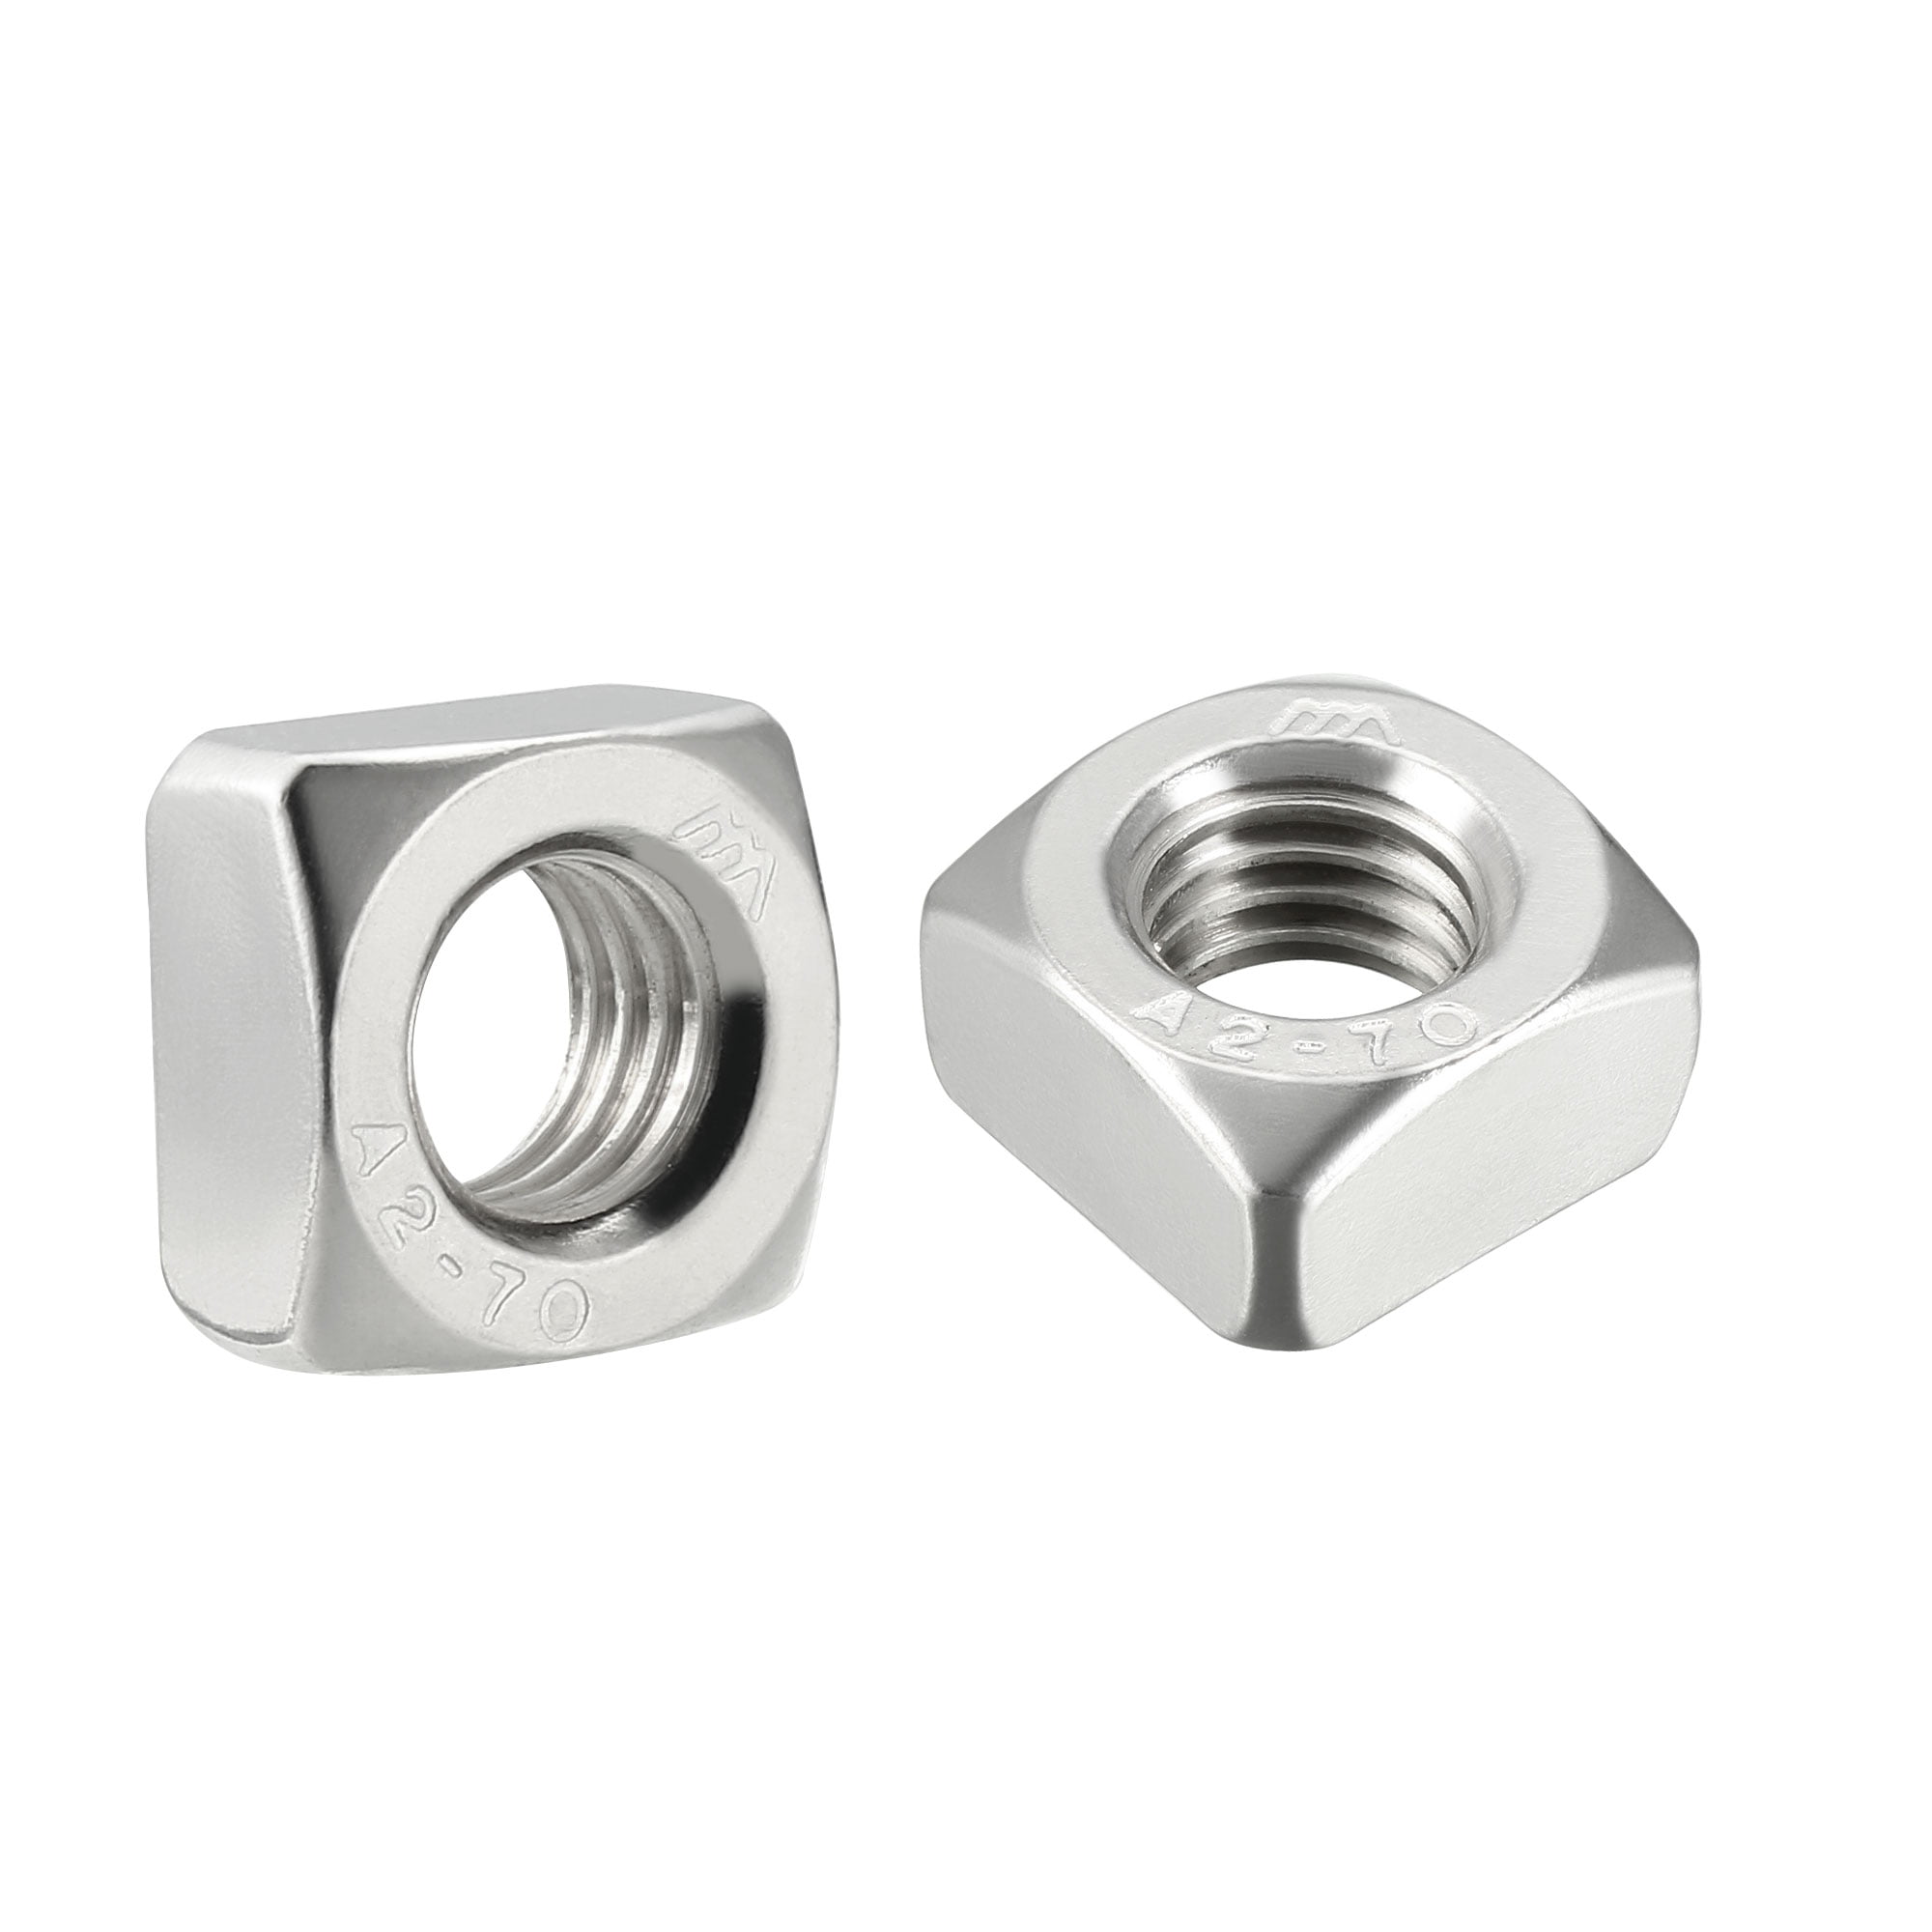 SUS Stainless Steel Square Nuts Fit for Metric Screw Bolts M4 M5 M6 M8 M10 